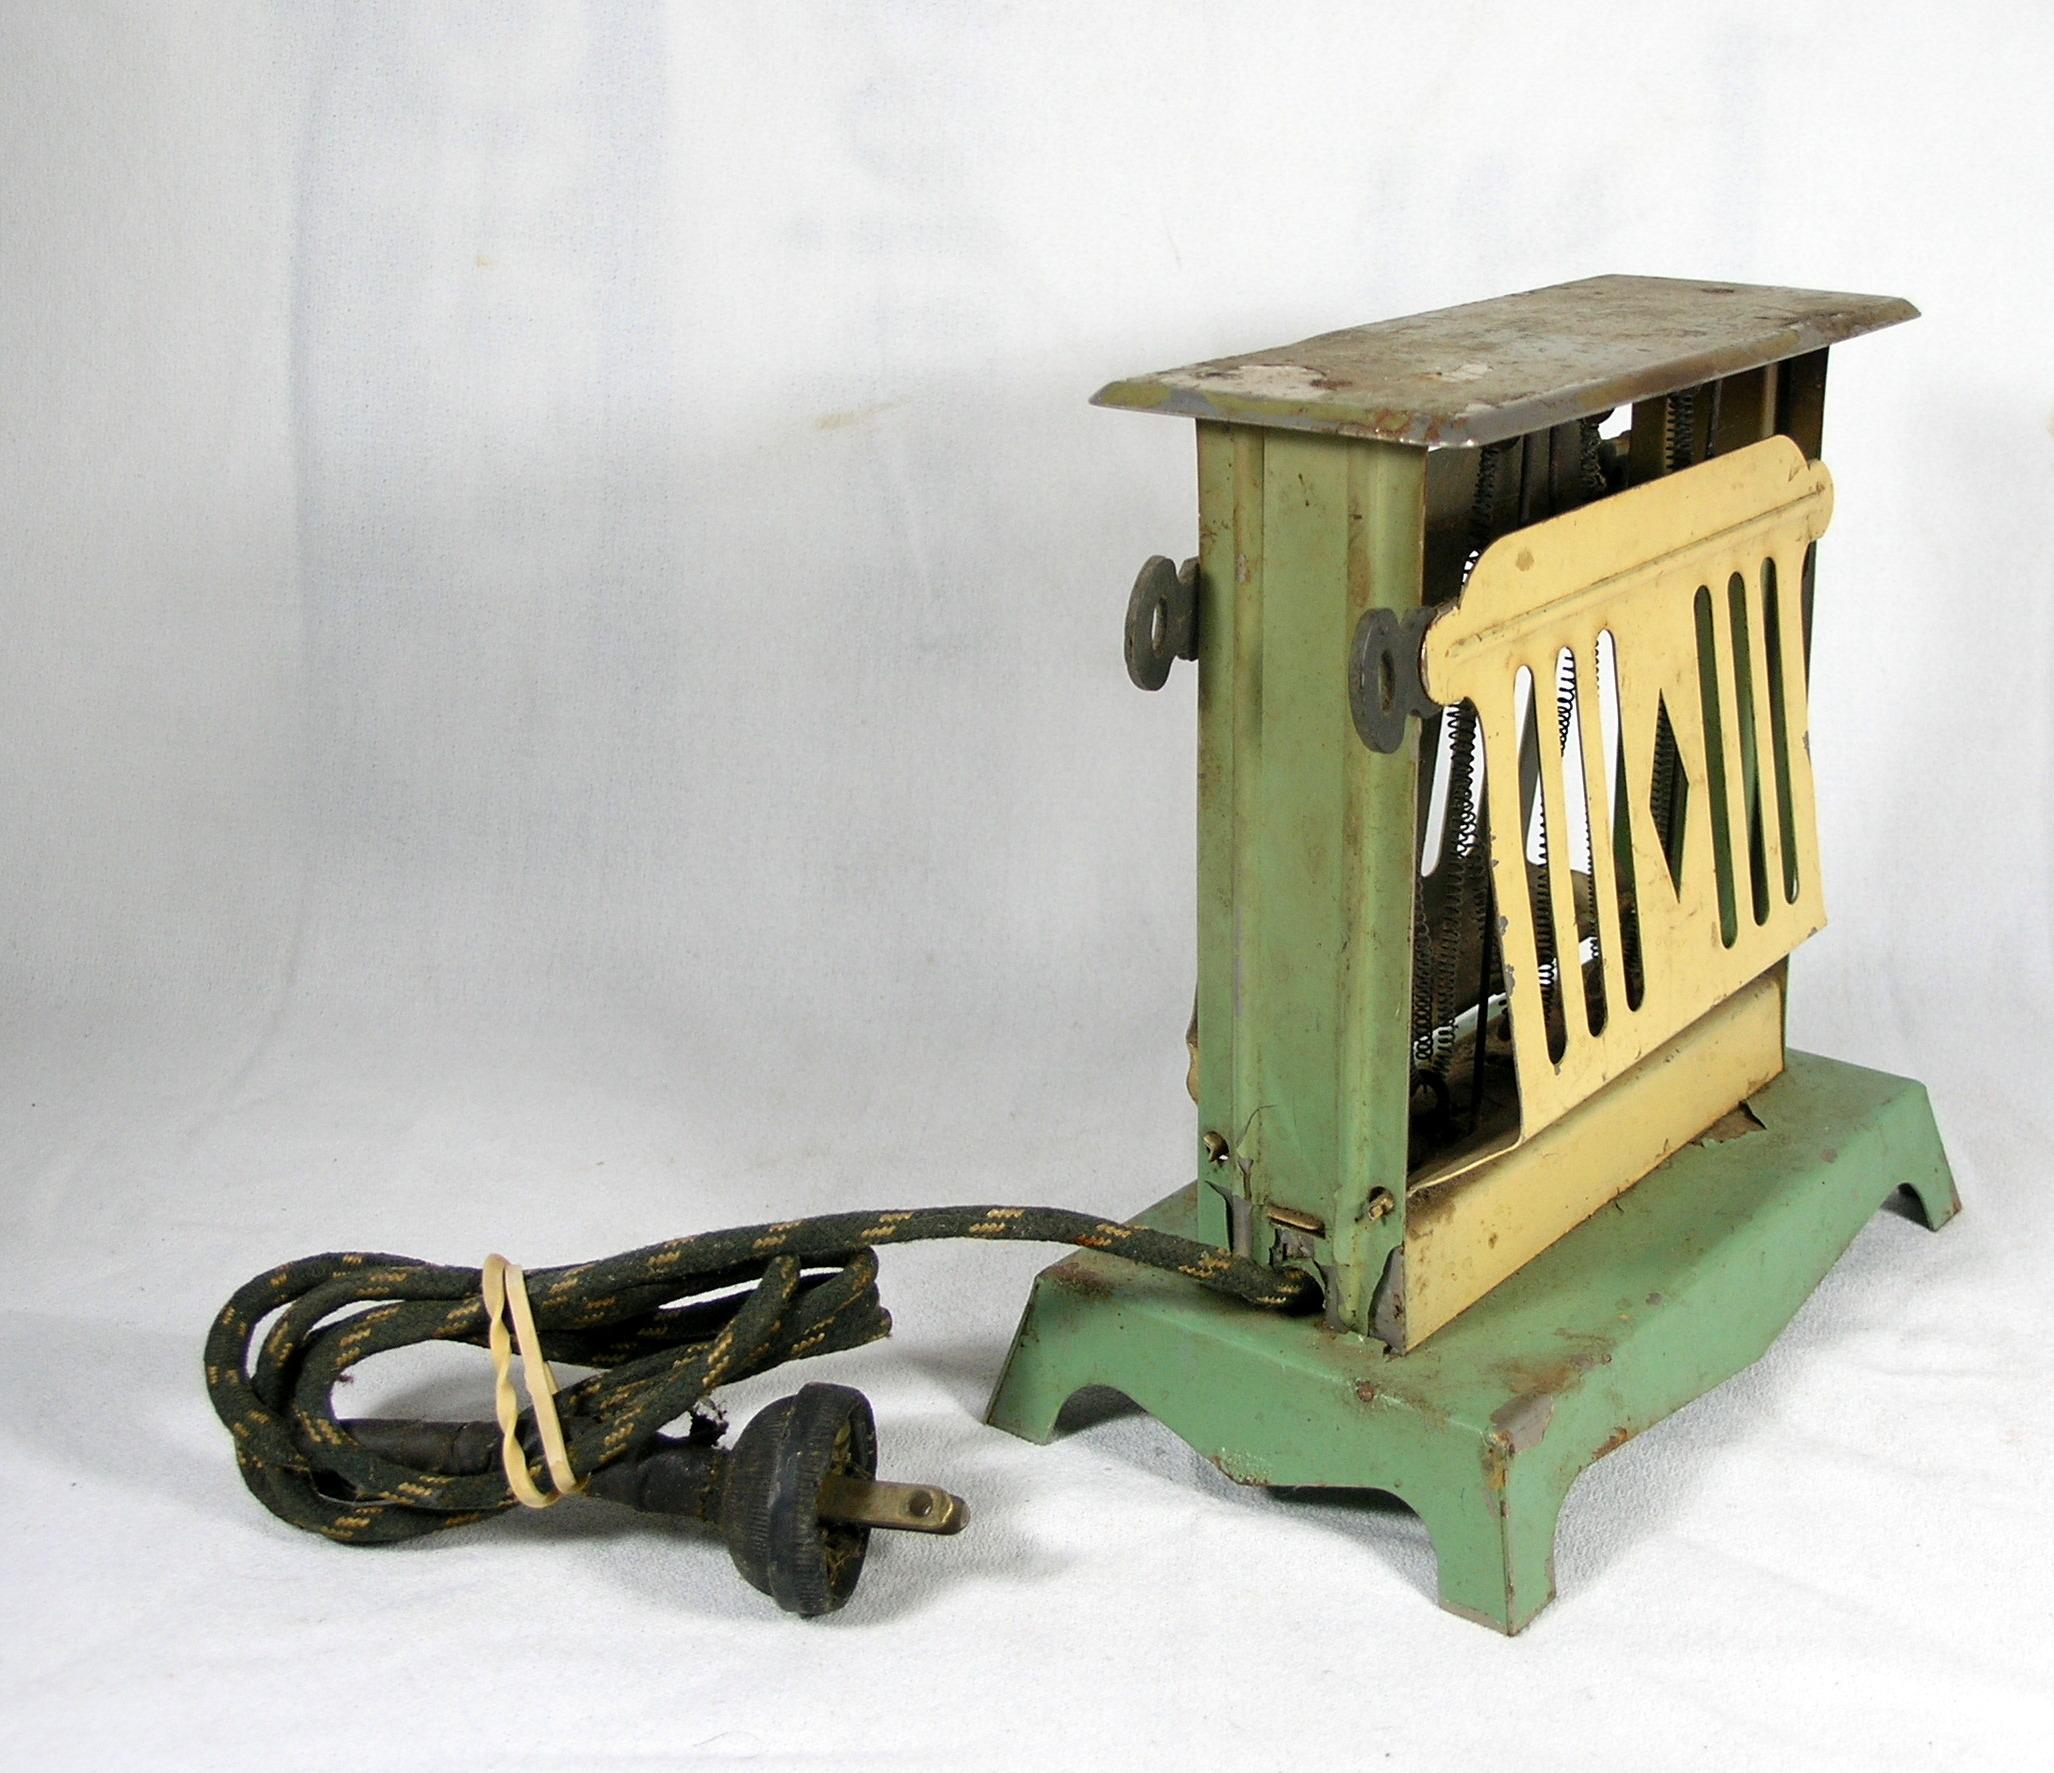 Vintage 1930's Handy Hot Toaster Not Tested Good Condition.  Stands 7-1/4"